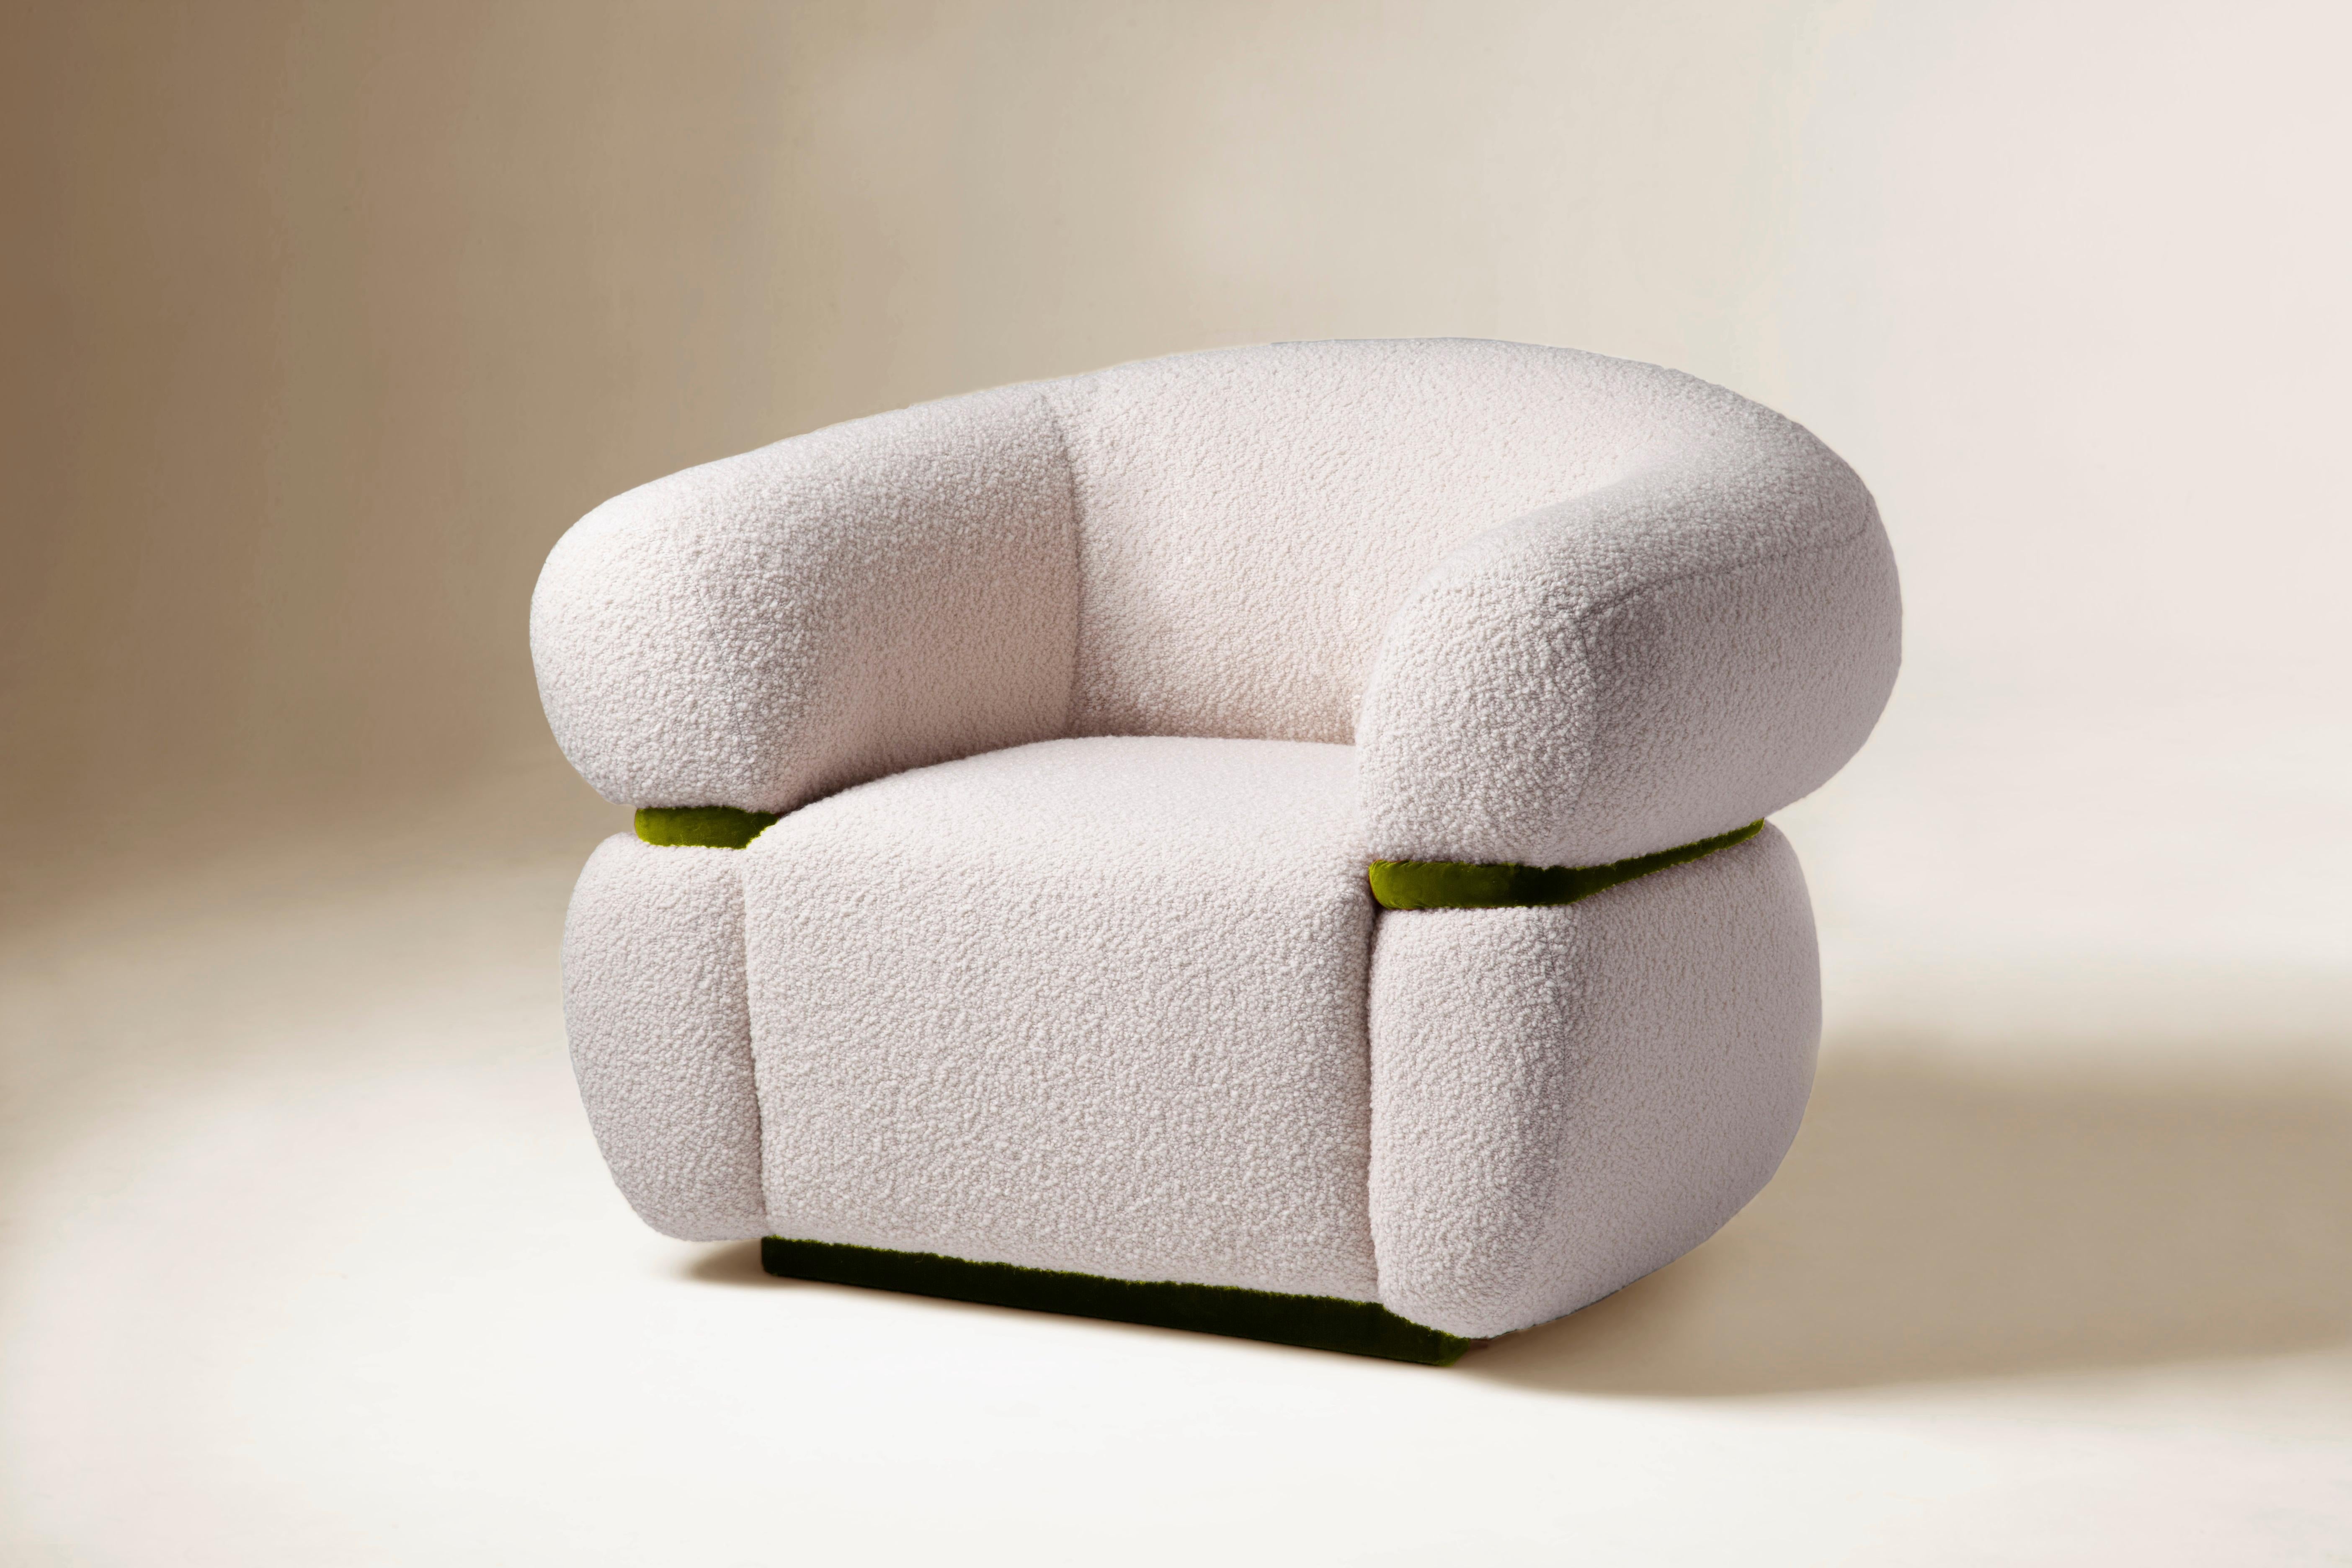 Like a warm embrace, Malibu Lounge Armchair welcomes you to stay within and relax. An elevated homage to the golden age of midcentury design and organic architecture, it radiates through its unusual proportions and strong curves with softness and